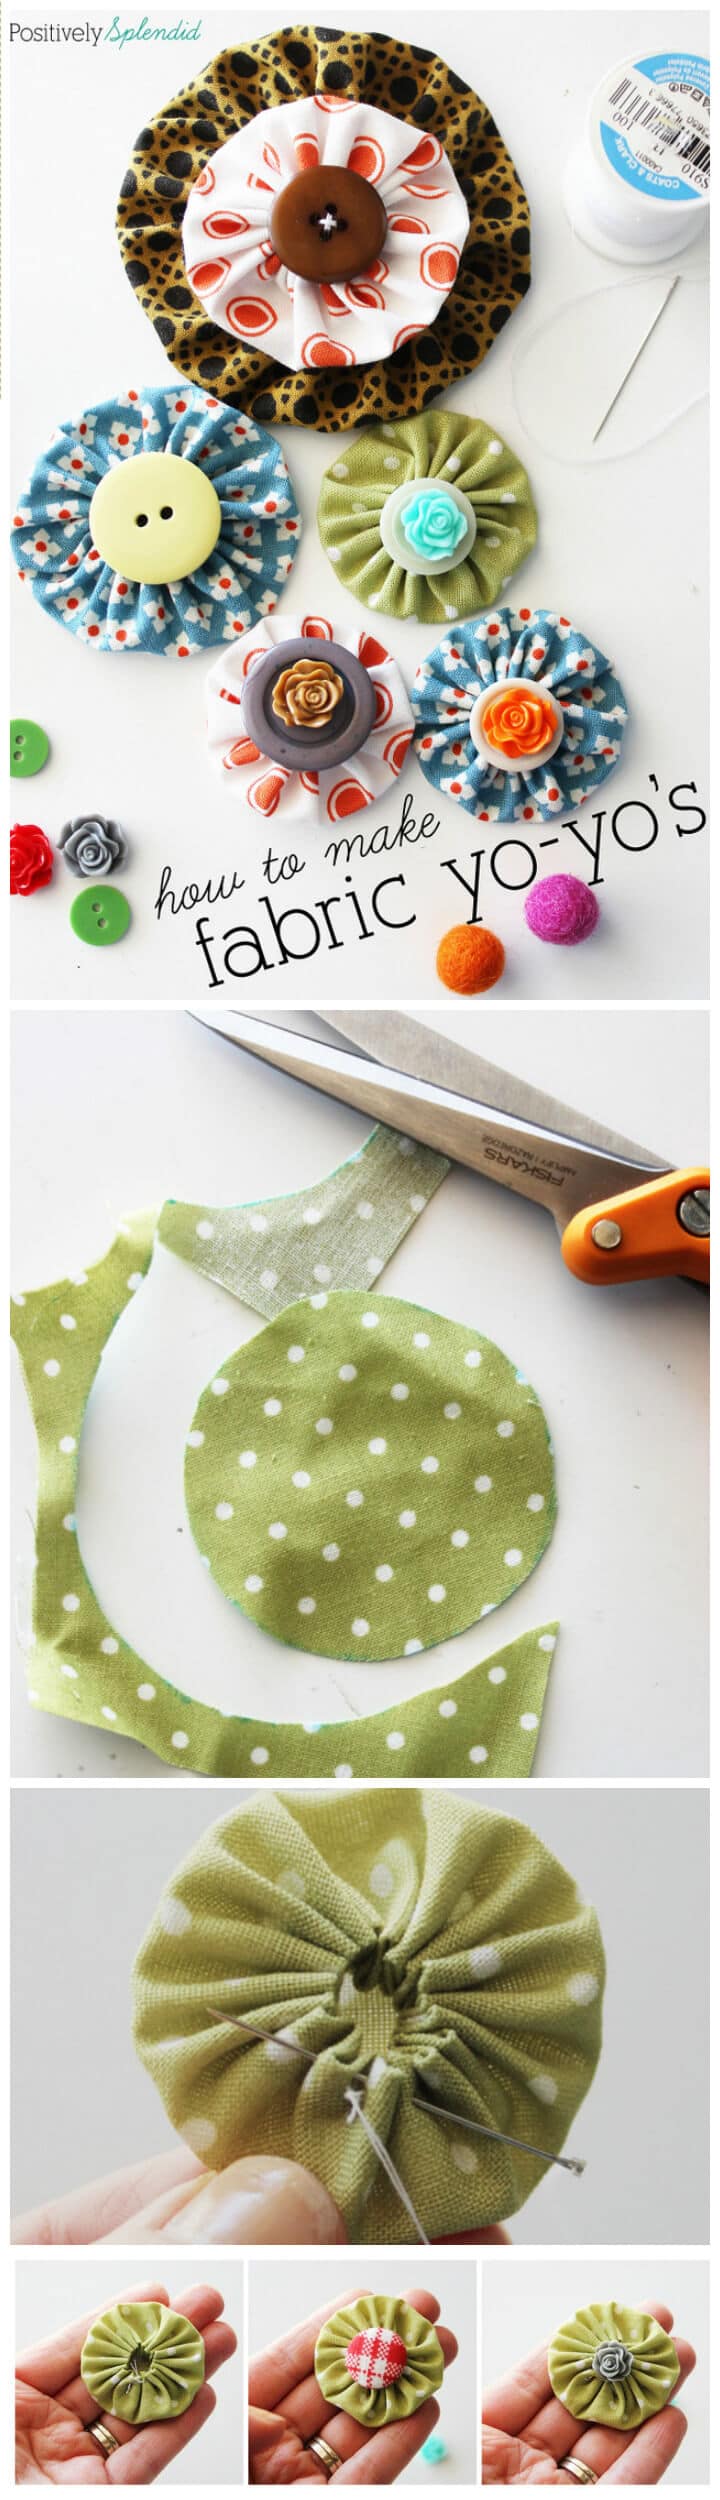 Easy peasy yo yo clips. Create adorable bookmarks by making fabric yo yo's and attaching them to paper clips. Kids will love this easy craft.